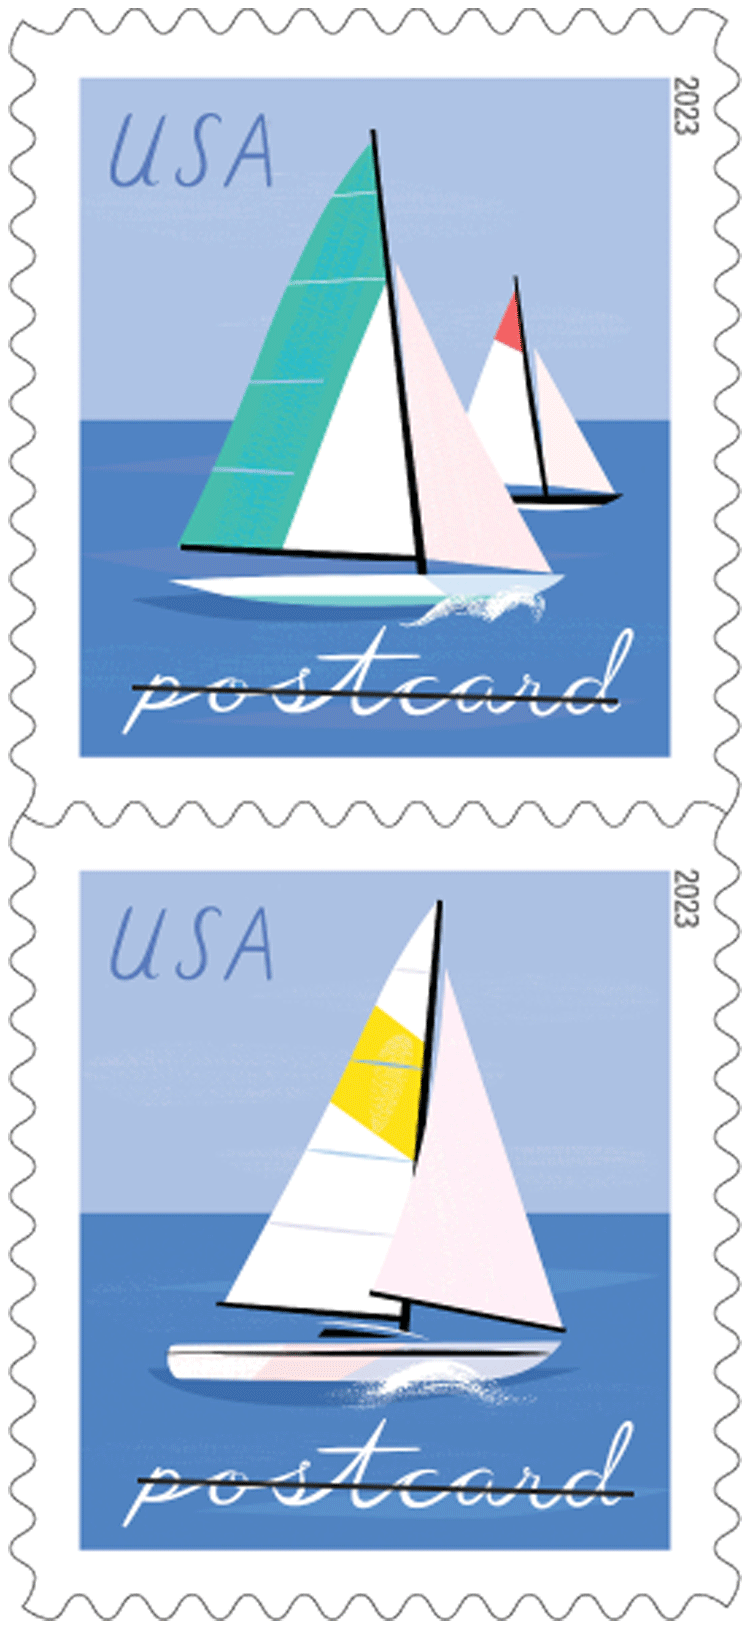 U.S. Postal Service to Shake Up Mail With Snow Globe Stamps